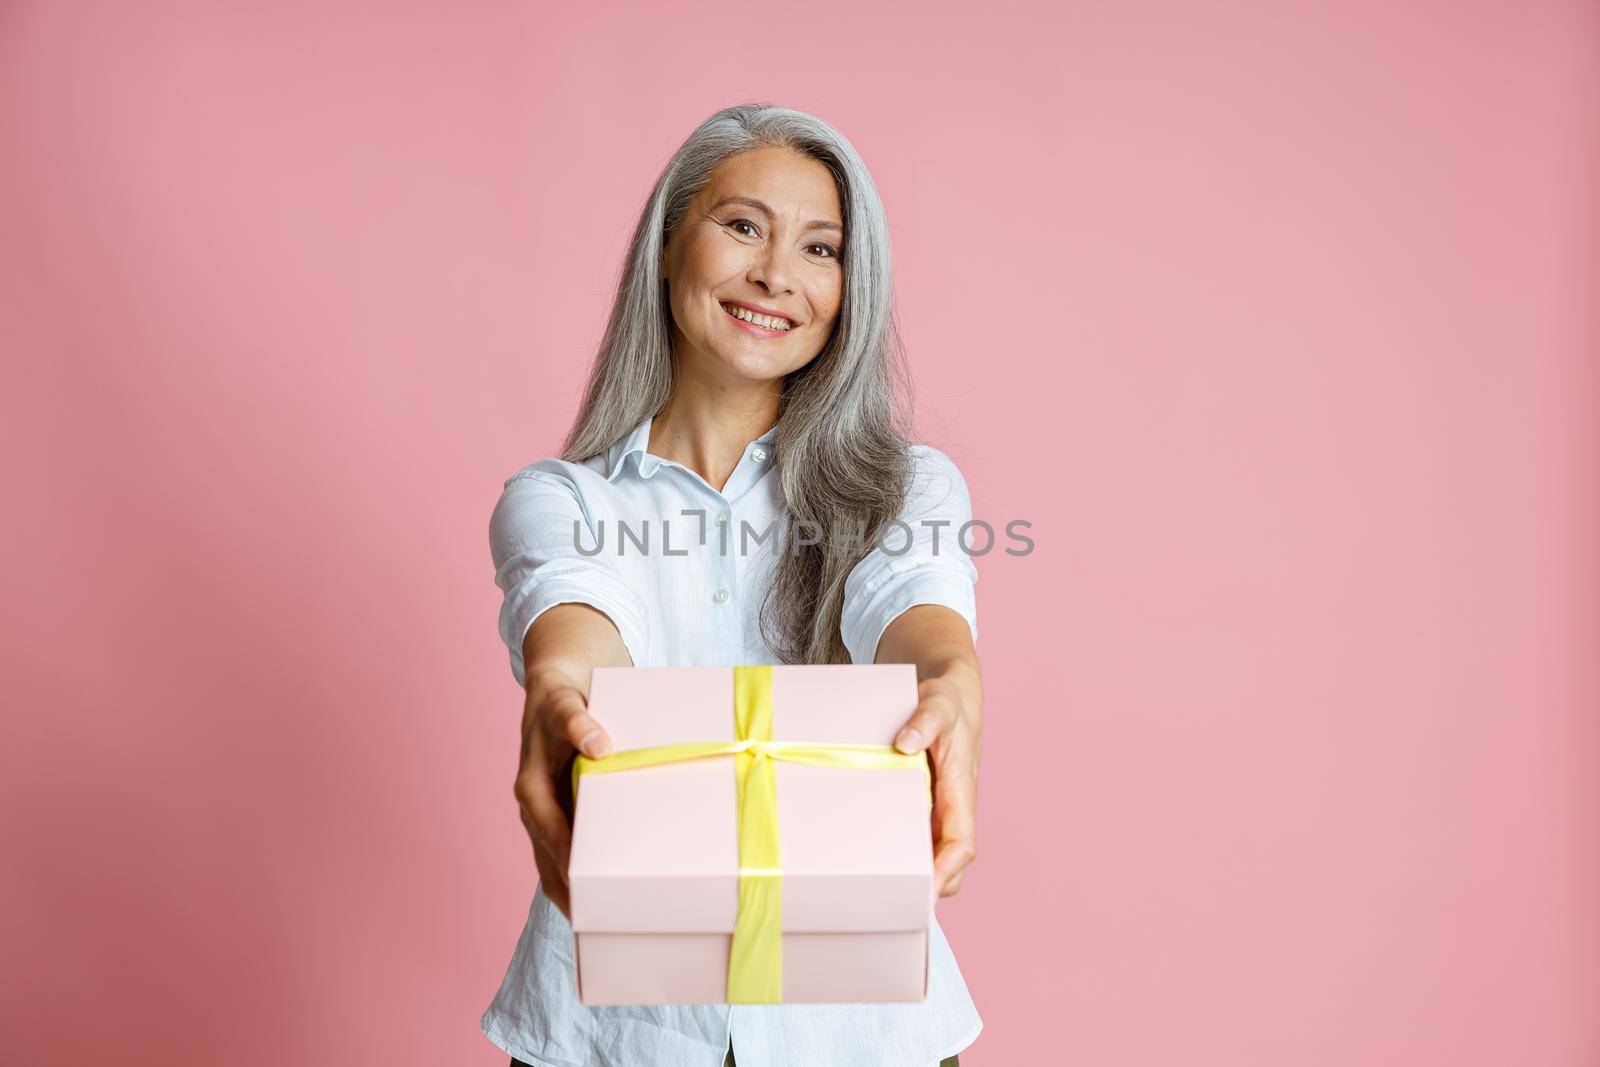 Pretty middle aged Asian lady with long loose hoary hair presents gift decorated with ribbon standing on pink background in studio